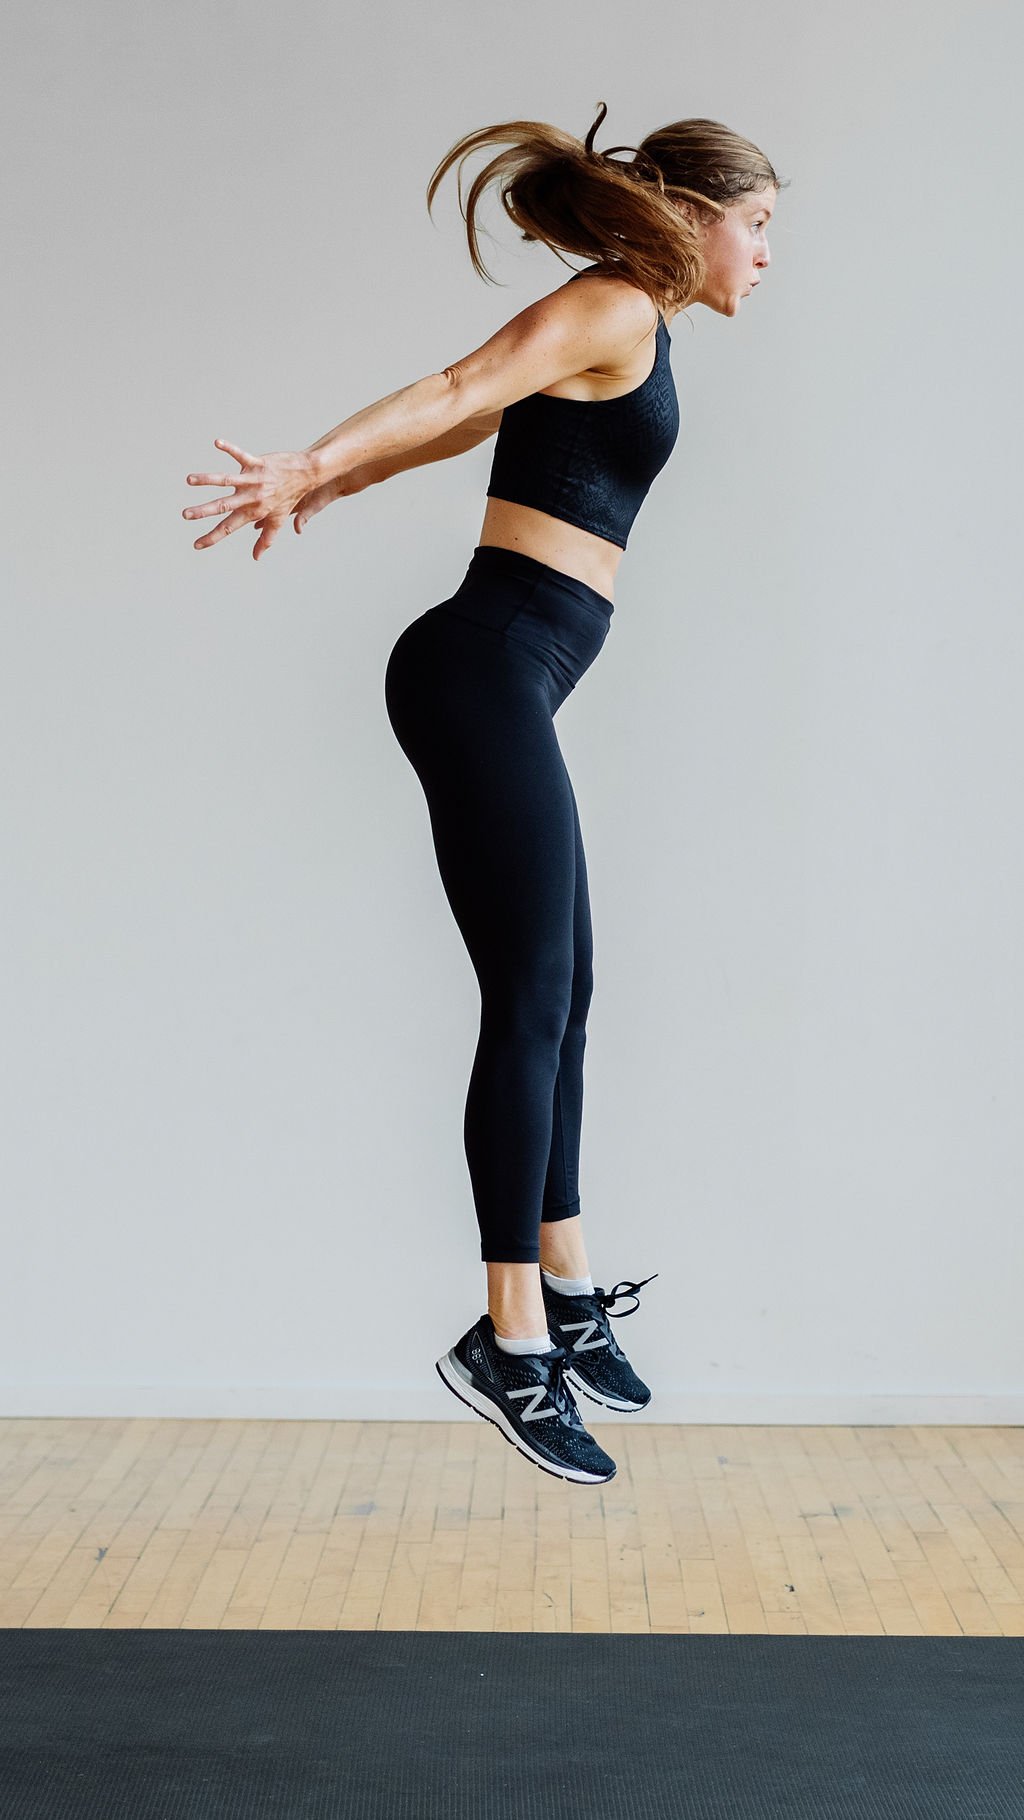 This HIIT Leg Workout Will Double as Your Cardio! - Nourish, Move, Love